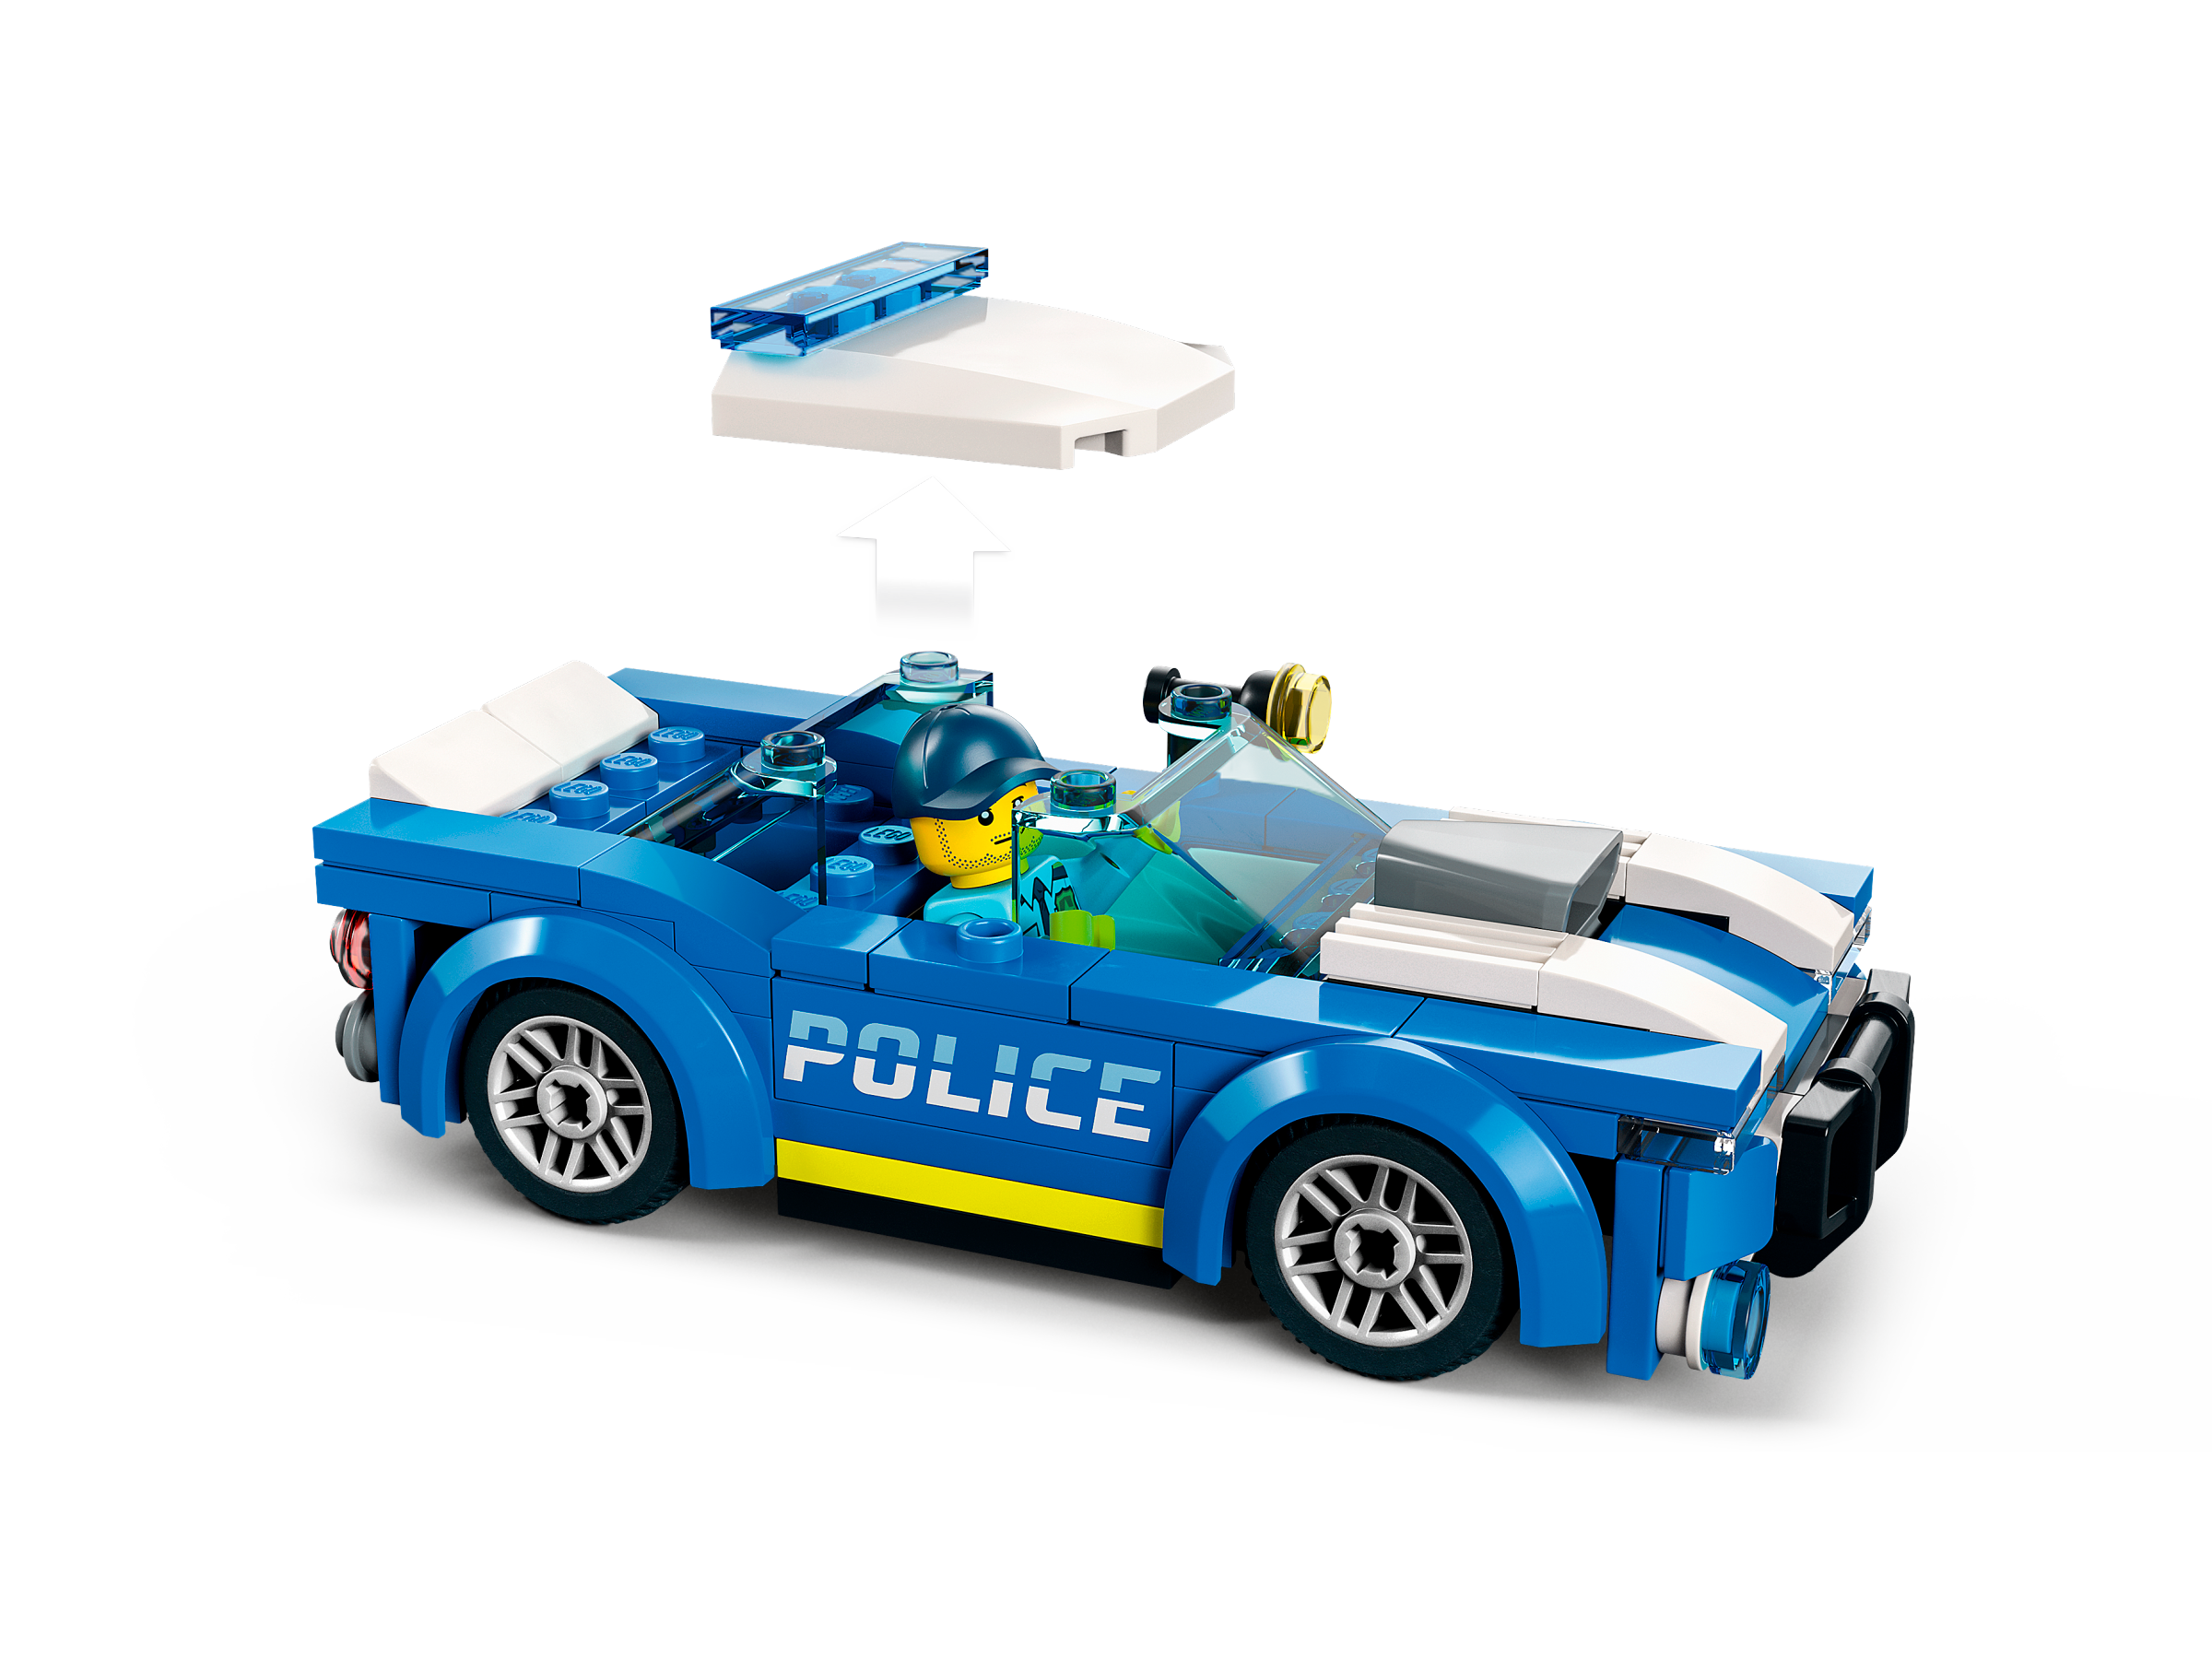 94 Pieces LEGO City Police Car 60312 Building Kit for Kids Aged 5 and Up; Includes a Police Officer Minifigure with a Toy Flashlight and a Police Cap 